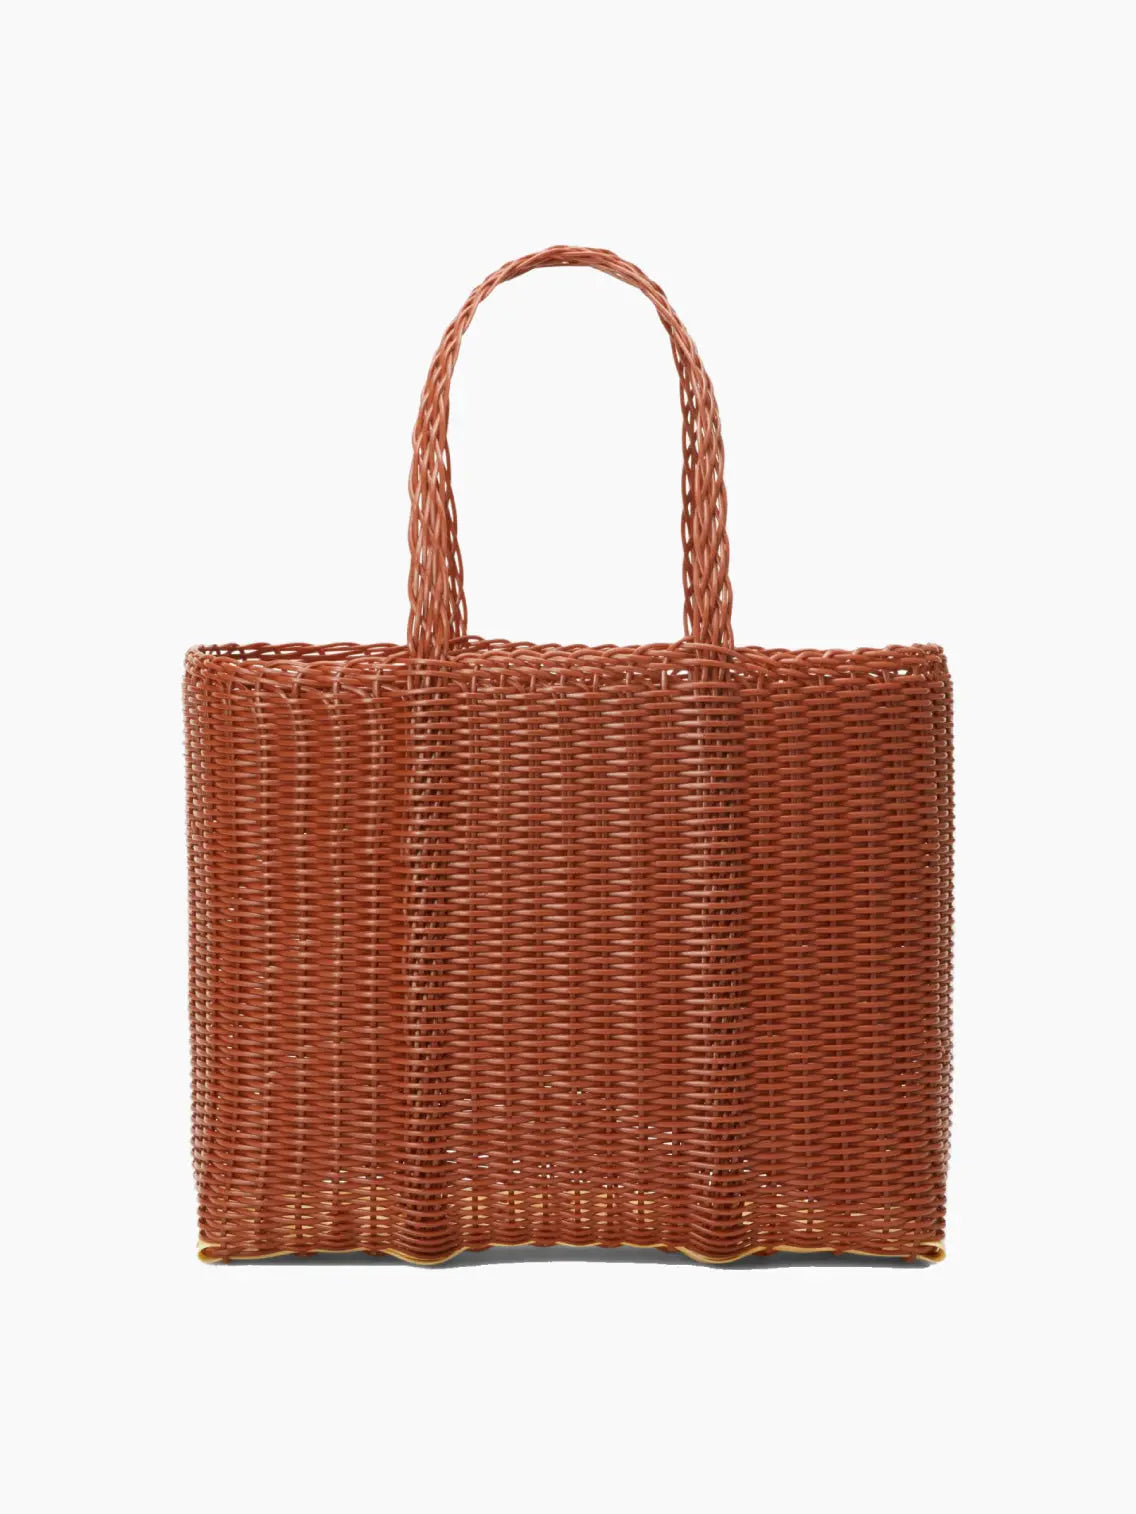 A rectangular, brown wicker handbag with sturdy double handles. The woven texture and earthy tone give it a rustic, natural appearance. Perfect for a day out in Barcelona, the Flat Small Clay Bag by Palorosa has a spacious interior, stylishly designed for practicality and fashion. Available now at Bassalstore.